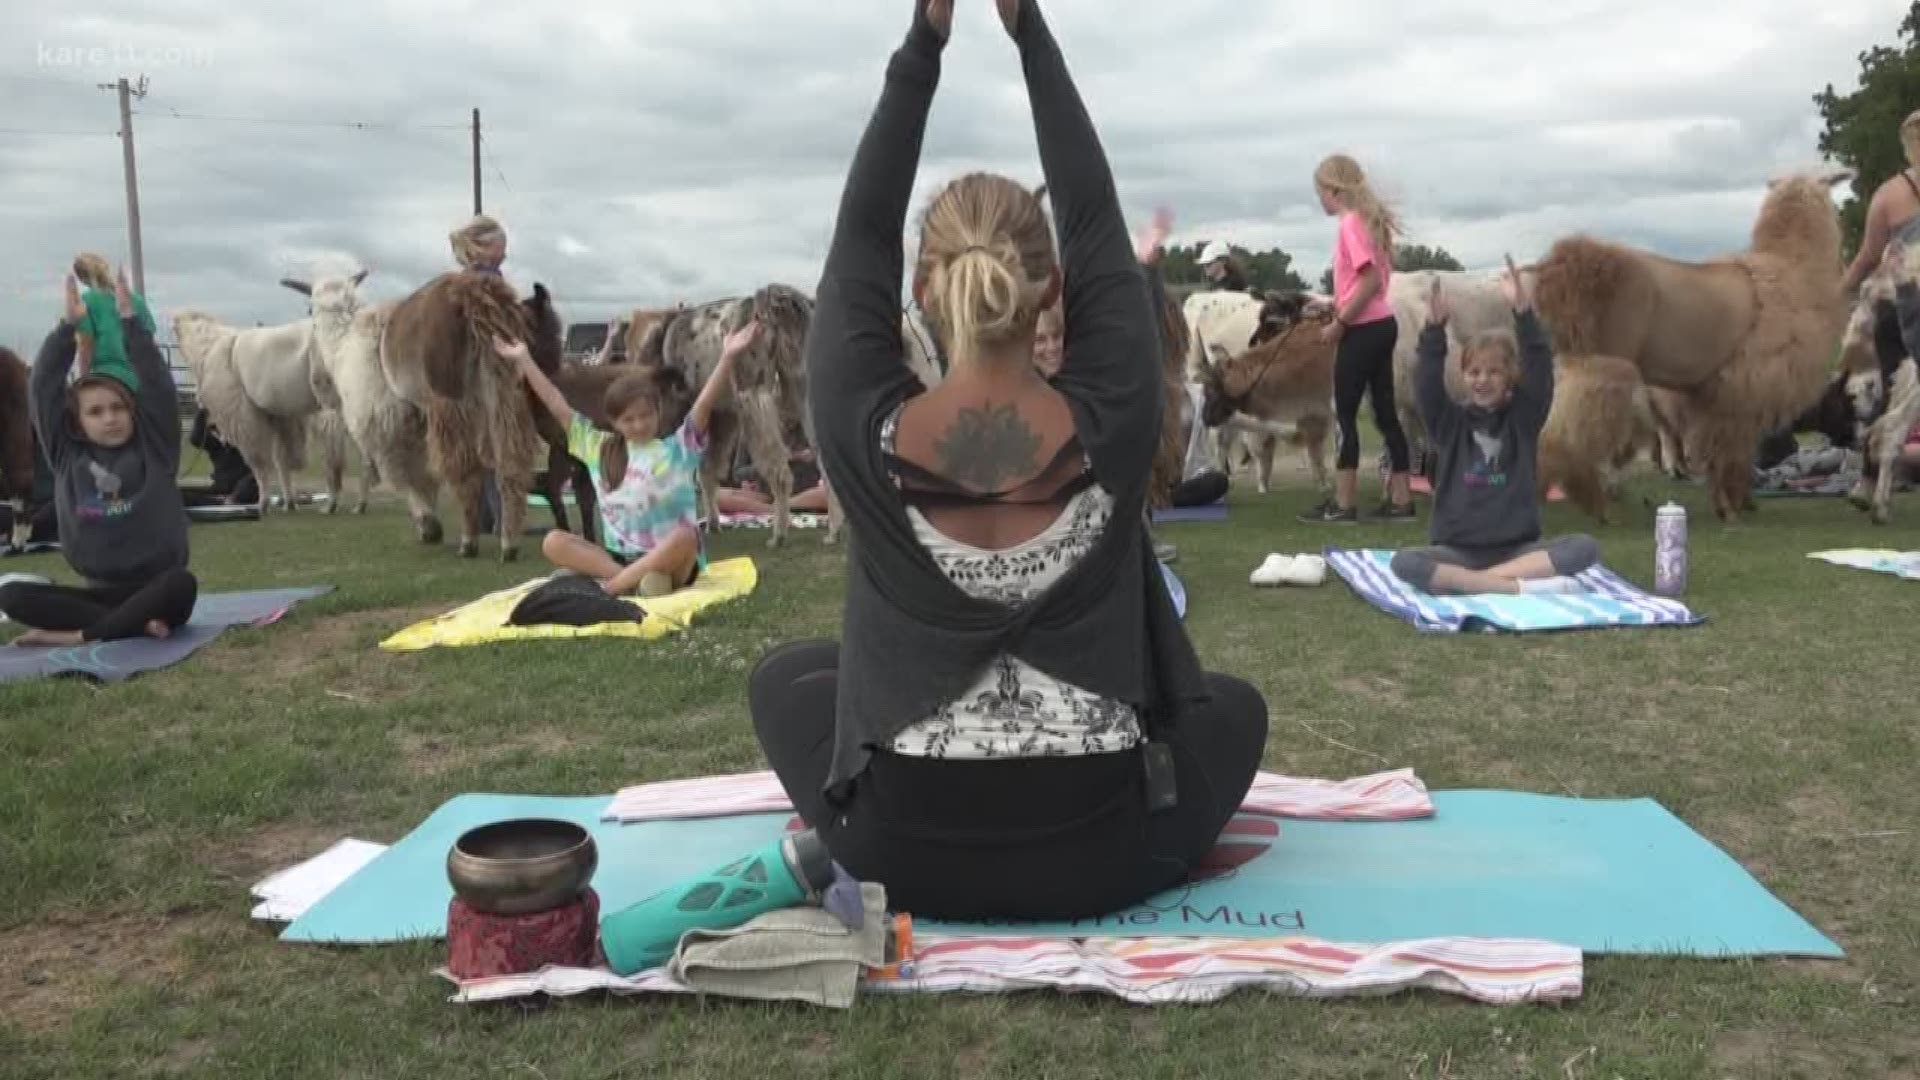 People go crazy over just about any type of yoga, so why not involve Llamas? That's actually happening at a pasture in Waconia.